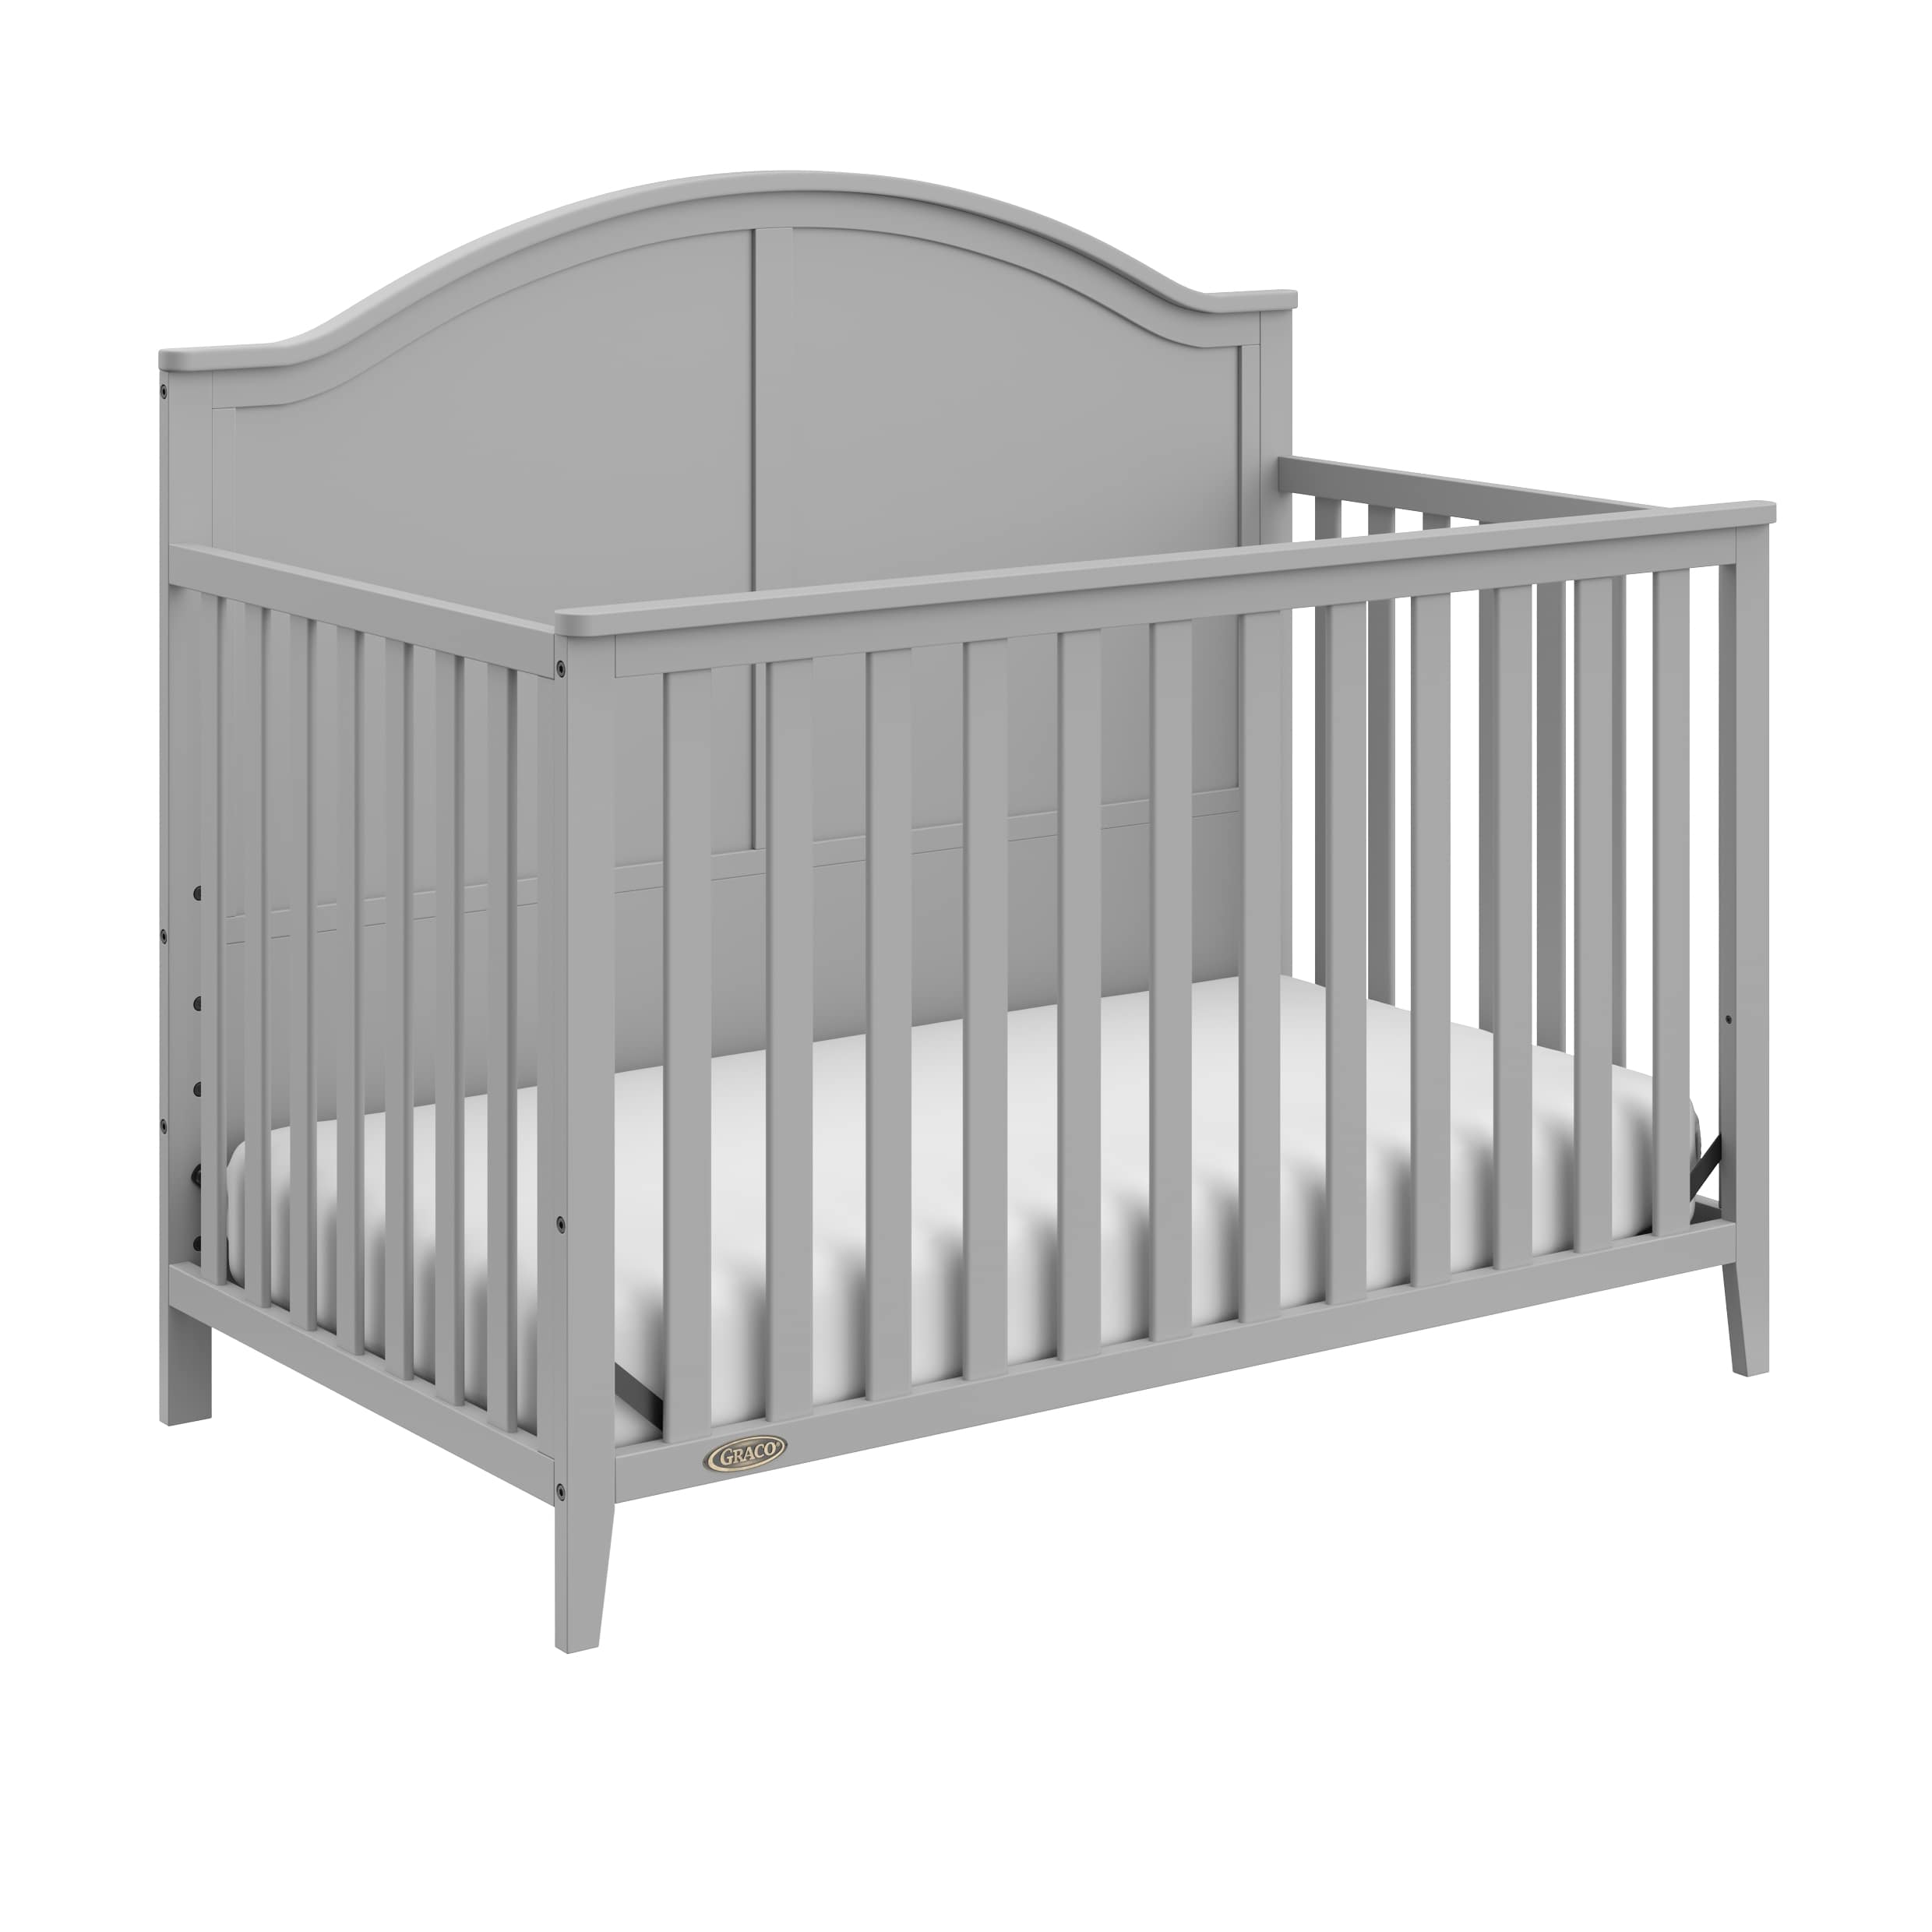 Graco Wilfred 5-in-1 Convertible Baby Crib, Pebble Gray - image 1 of 13